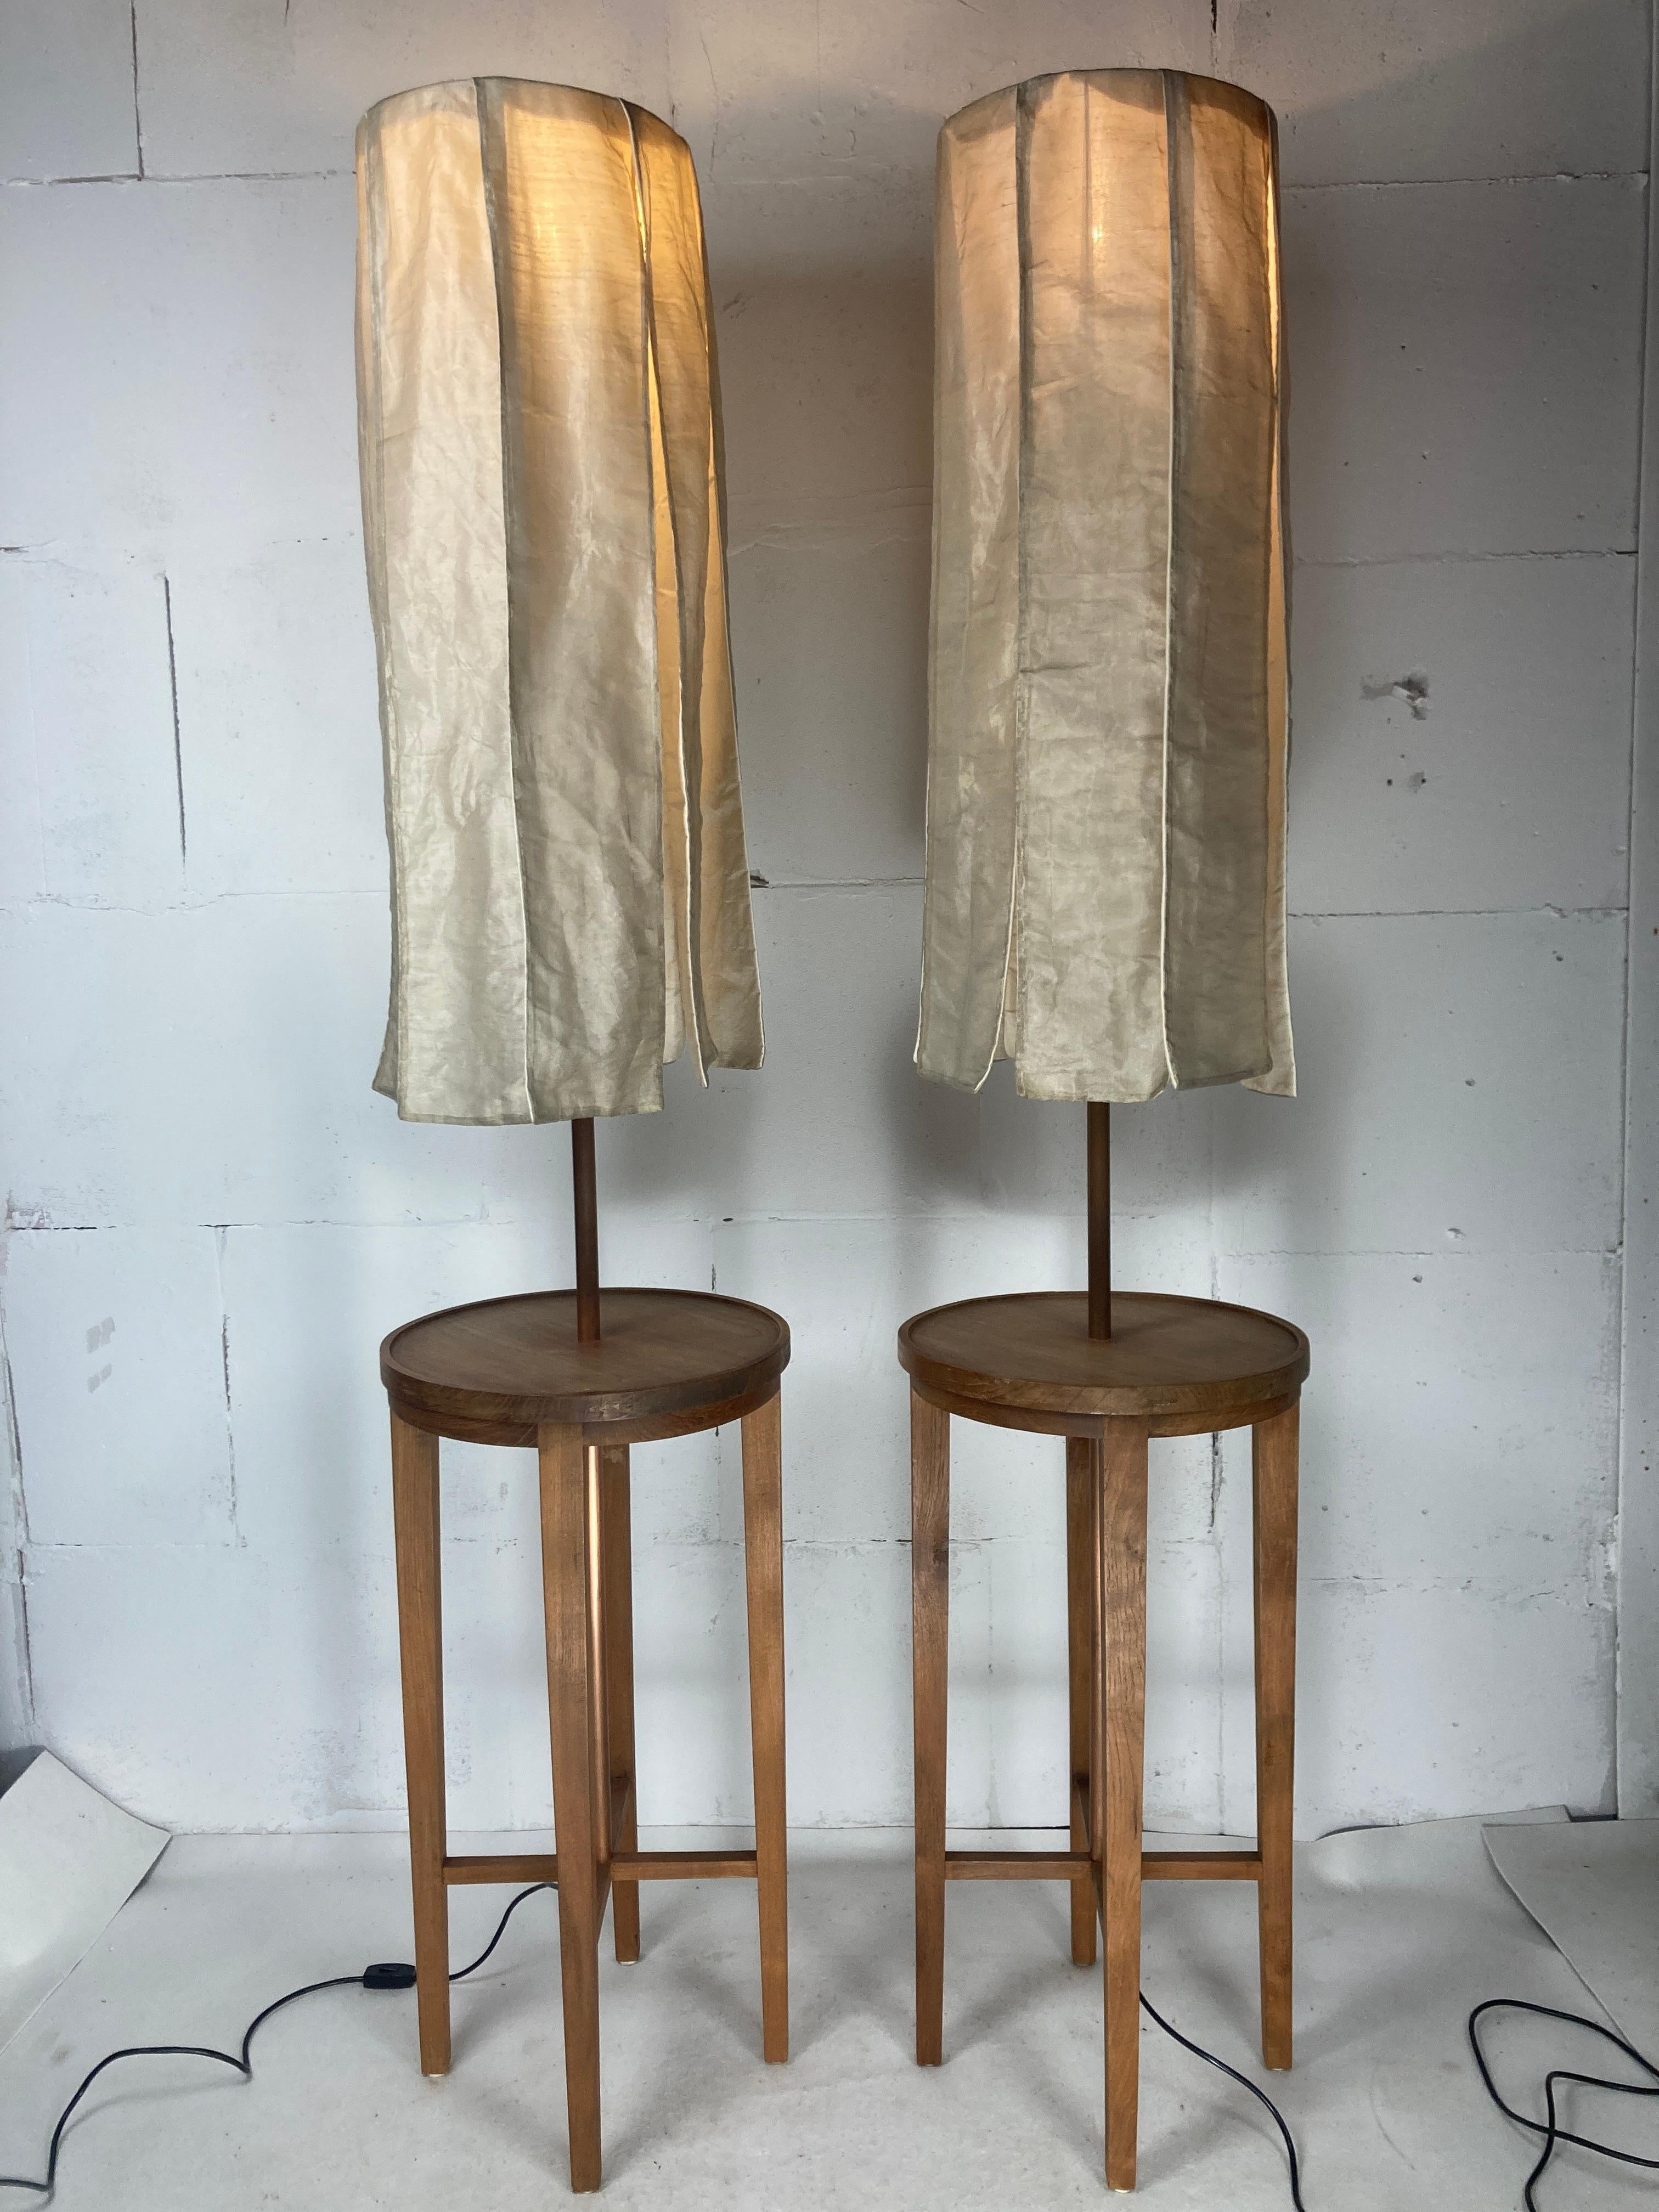 Absolutely stunning rare set of floor lamps by the late jan des bouvrie ( 1942 -2020 ). This wonderful pair in in a great vintage condition as can be seen in the pics. The teak is without any real damages but with some lovely wear over the years,